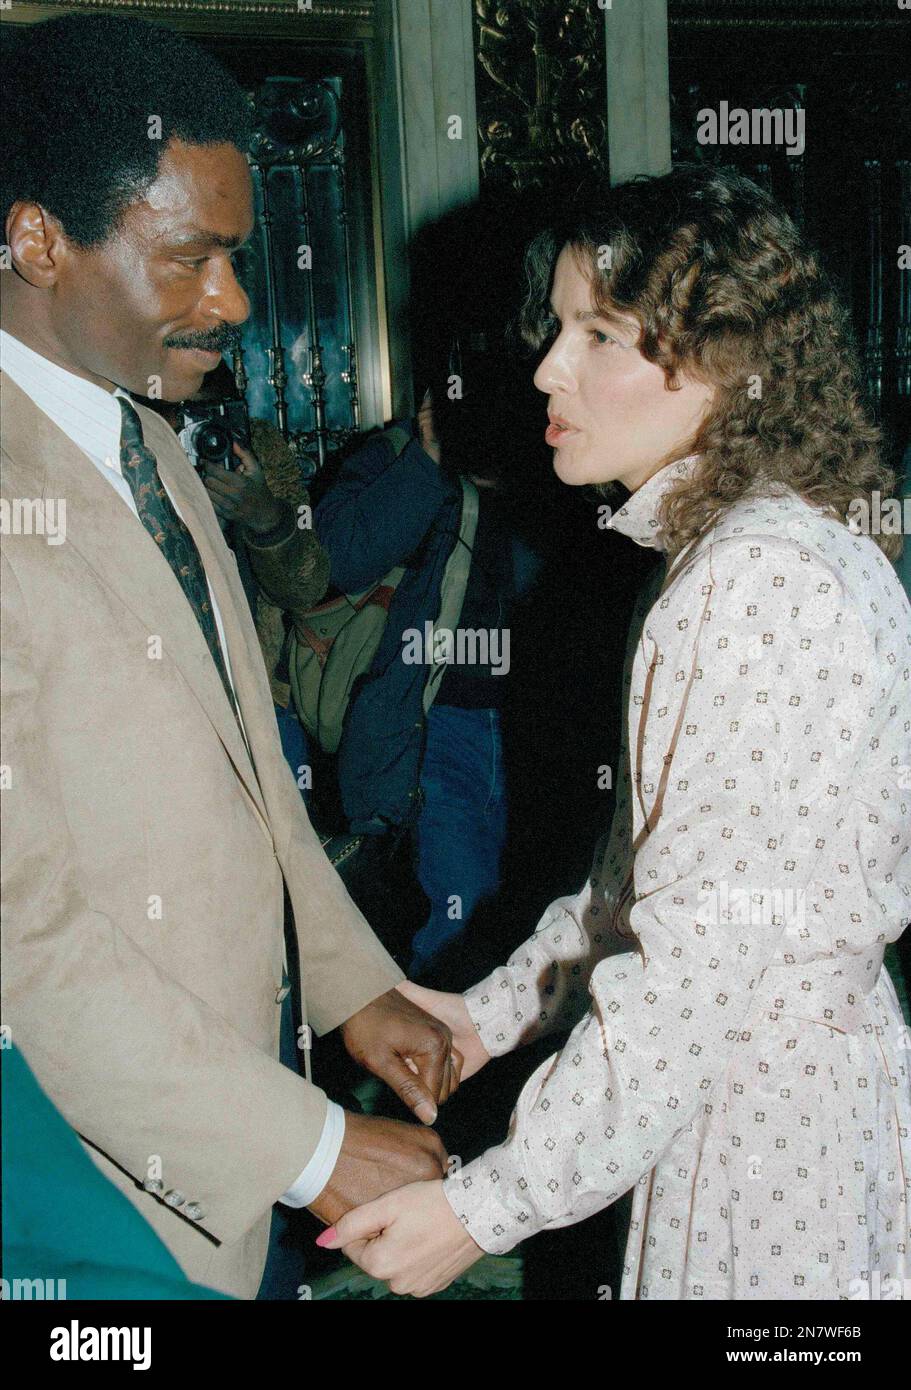 Rubin "Hurricane" Carter, left, holds the hands of Dolly Artis, wife of  John Artis, during a New York City press conference, Feb. 29, 1988. Carter  said he holds no bitterness for serving